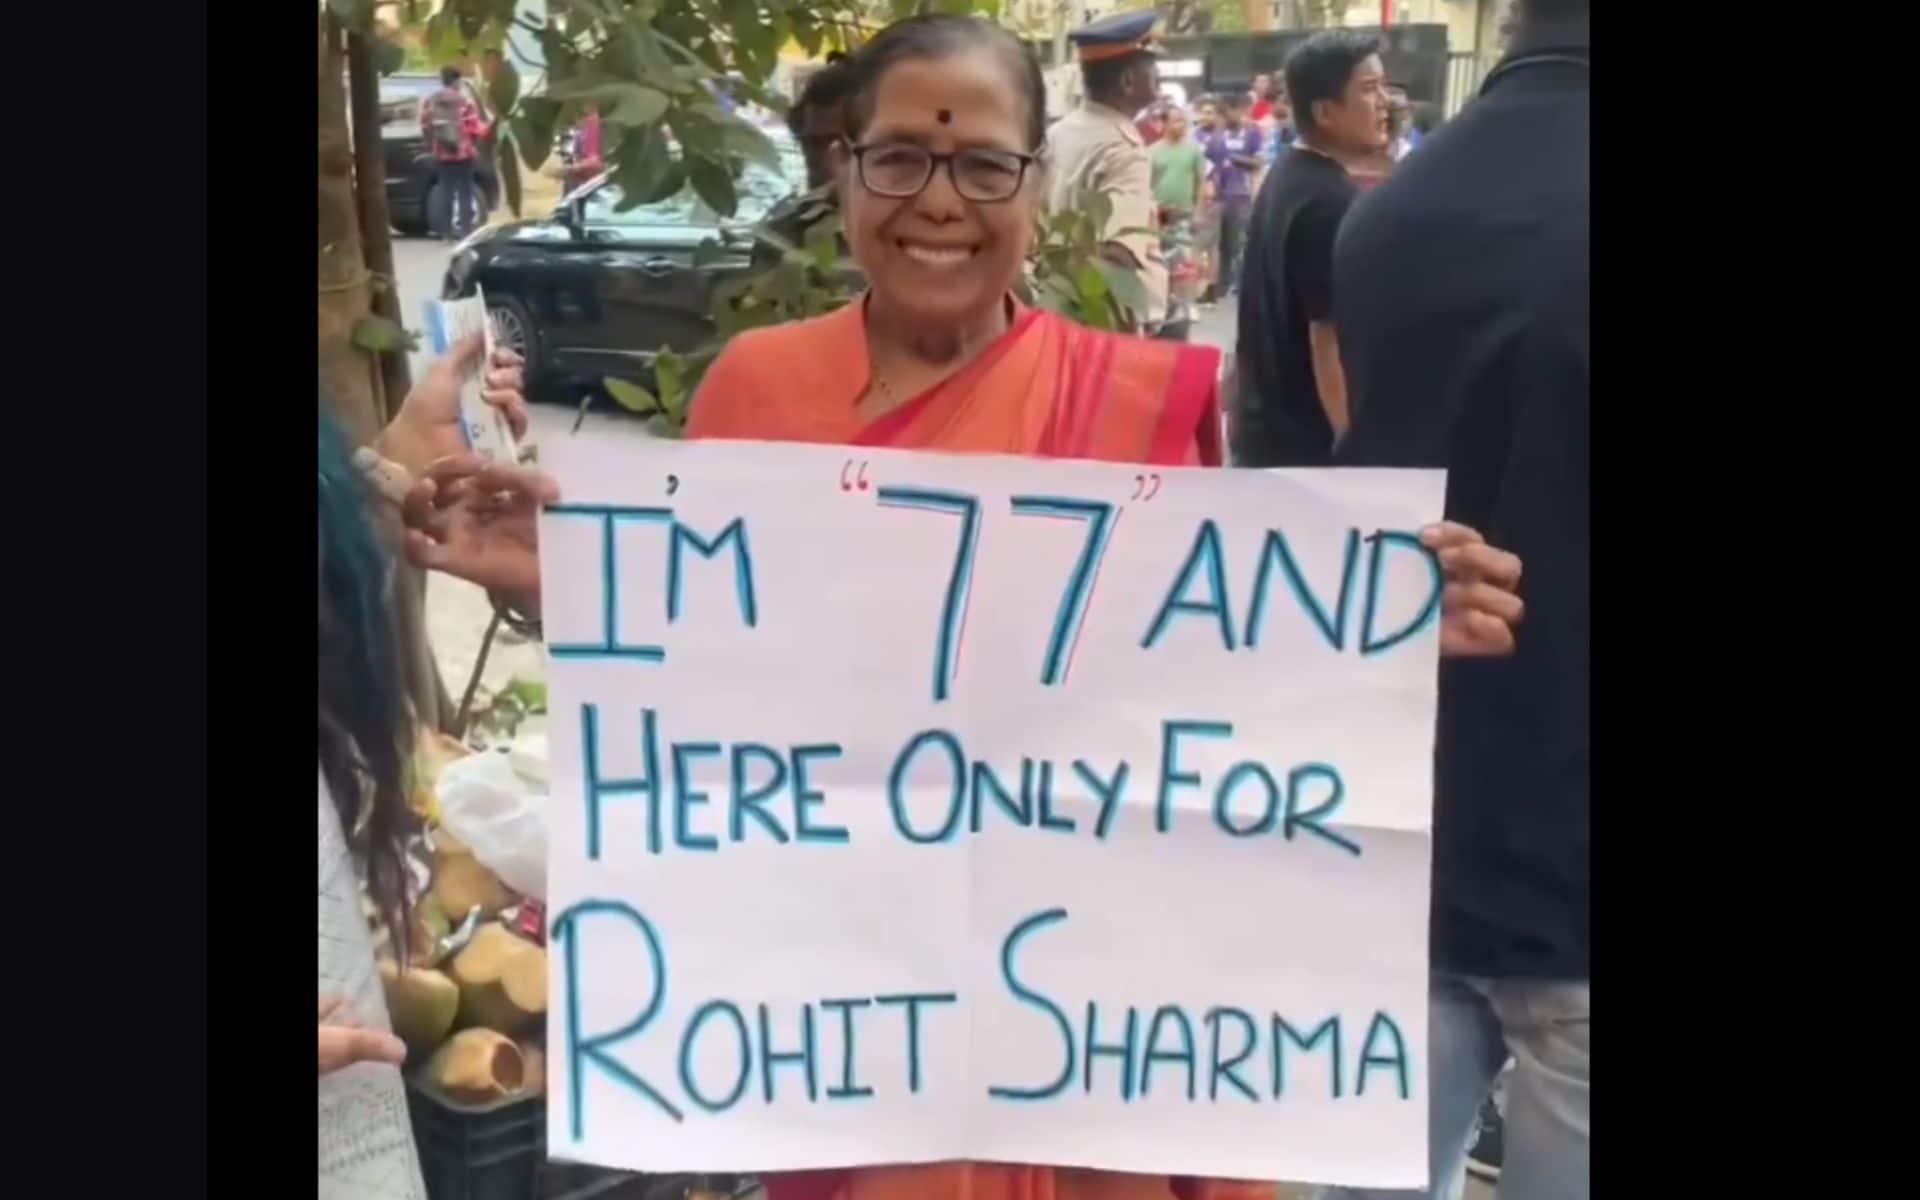 Elderly woman attended MI game to support Rohit Sharma (X.com)